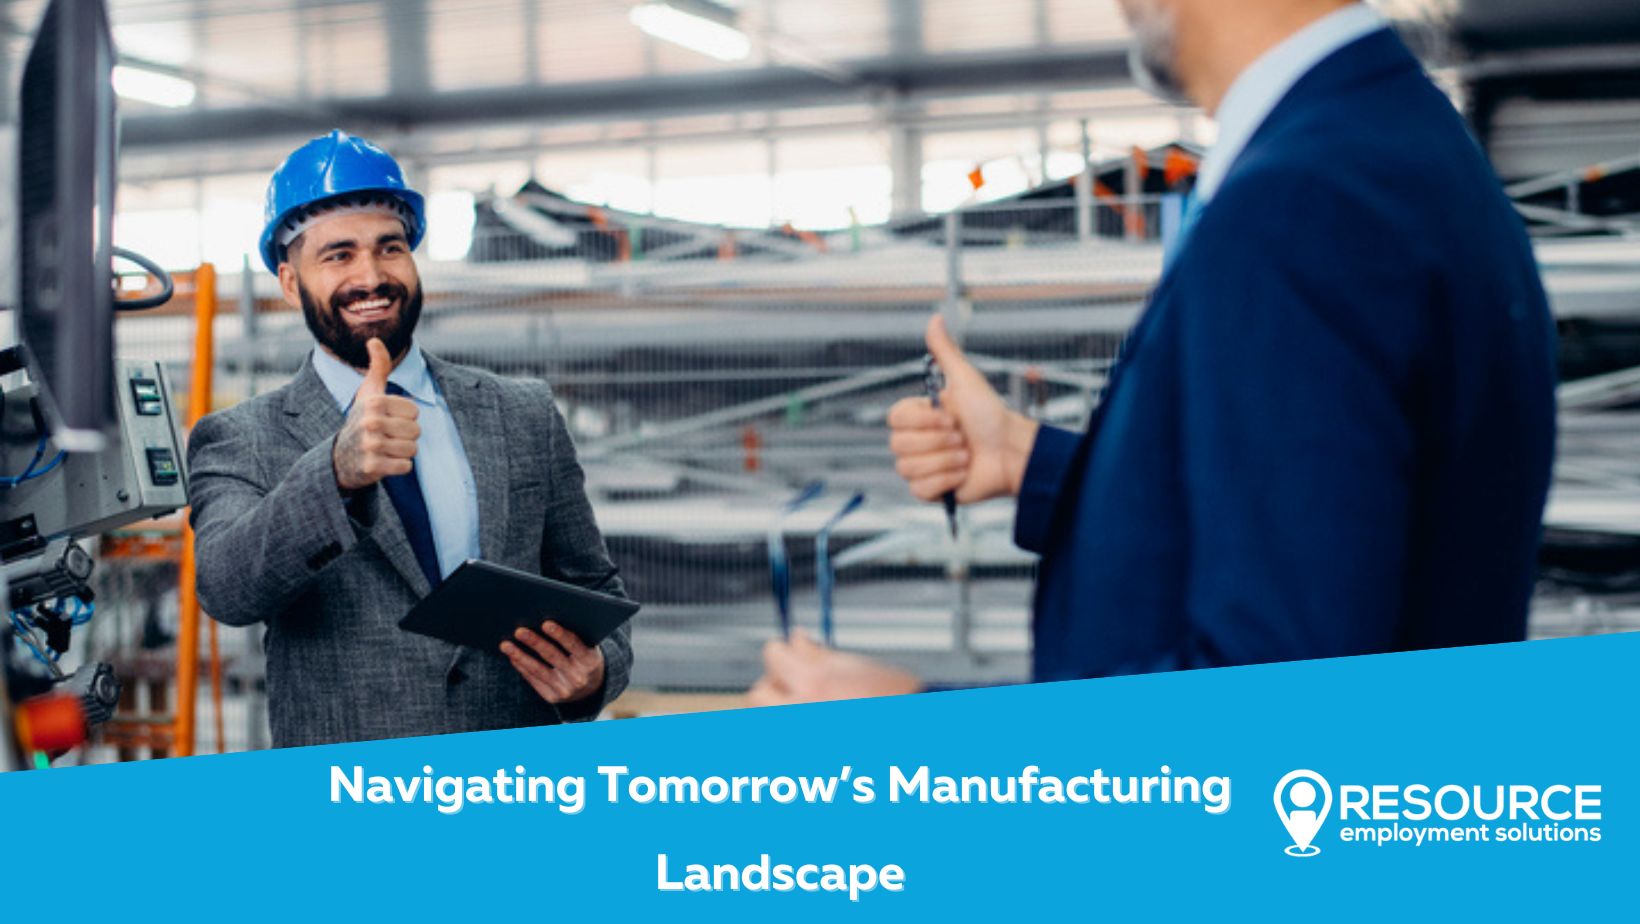 Navigating Tomorrow's Manufacturing Landscape with Resource Employment Solutions